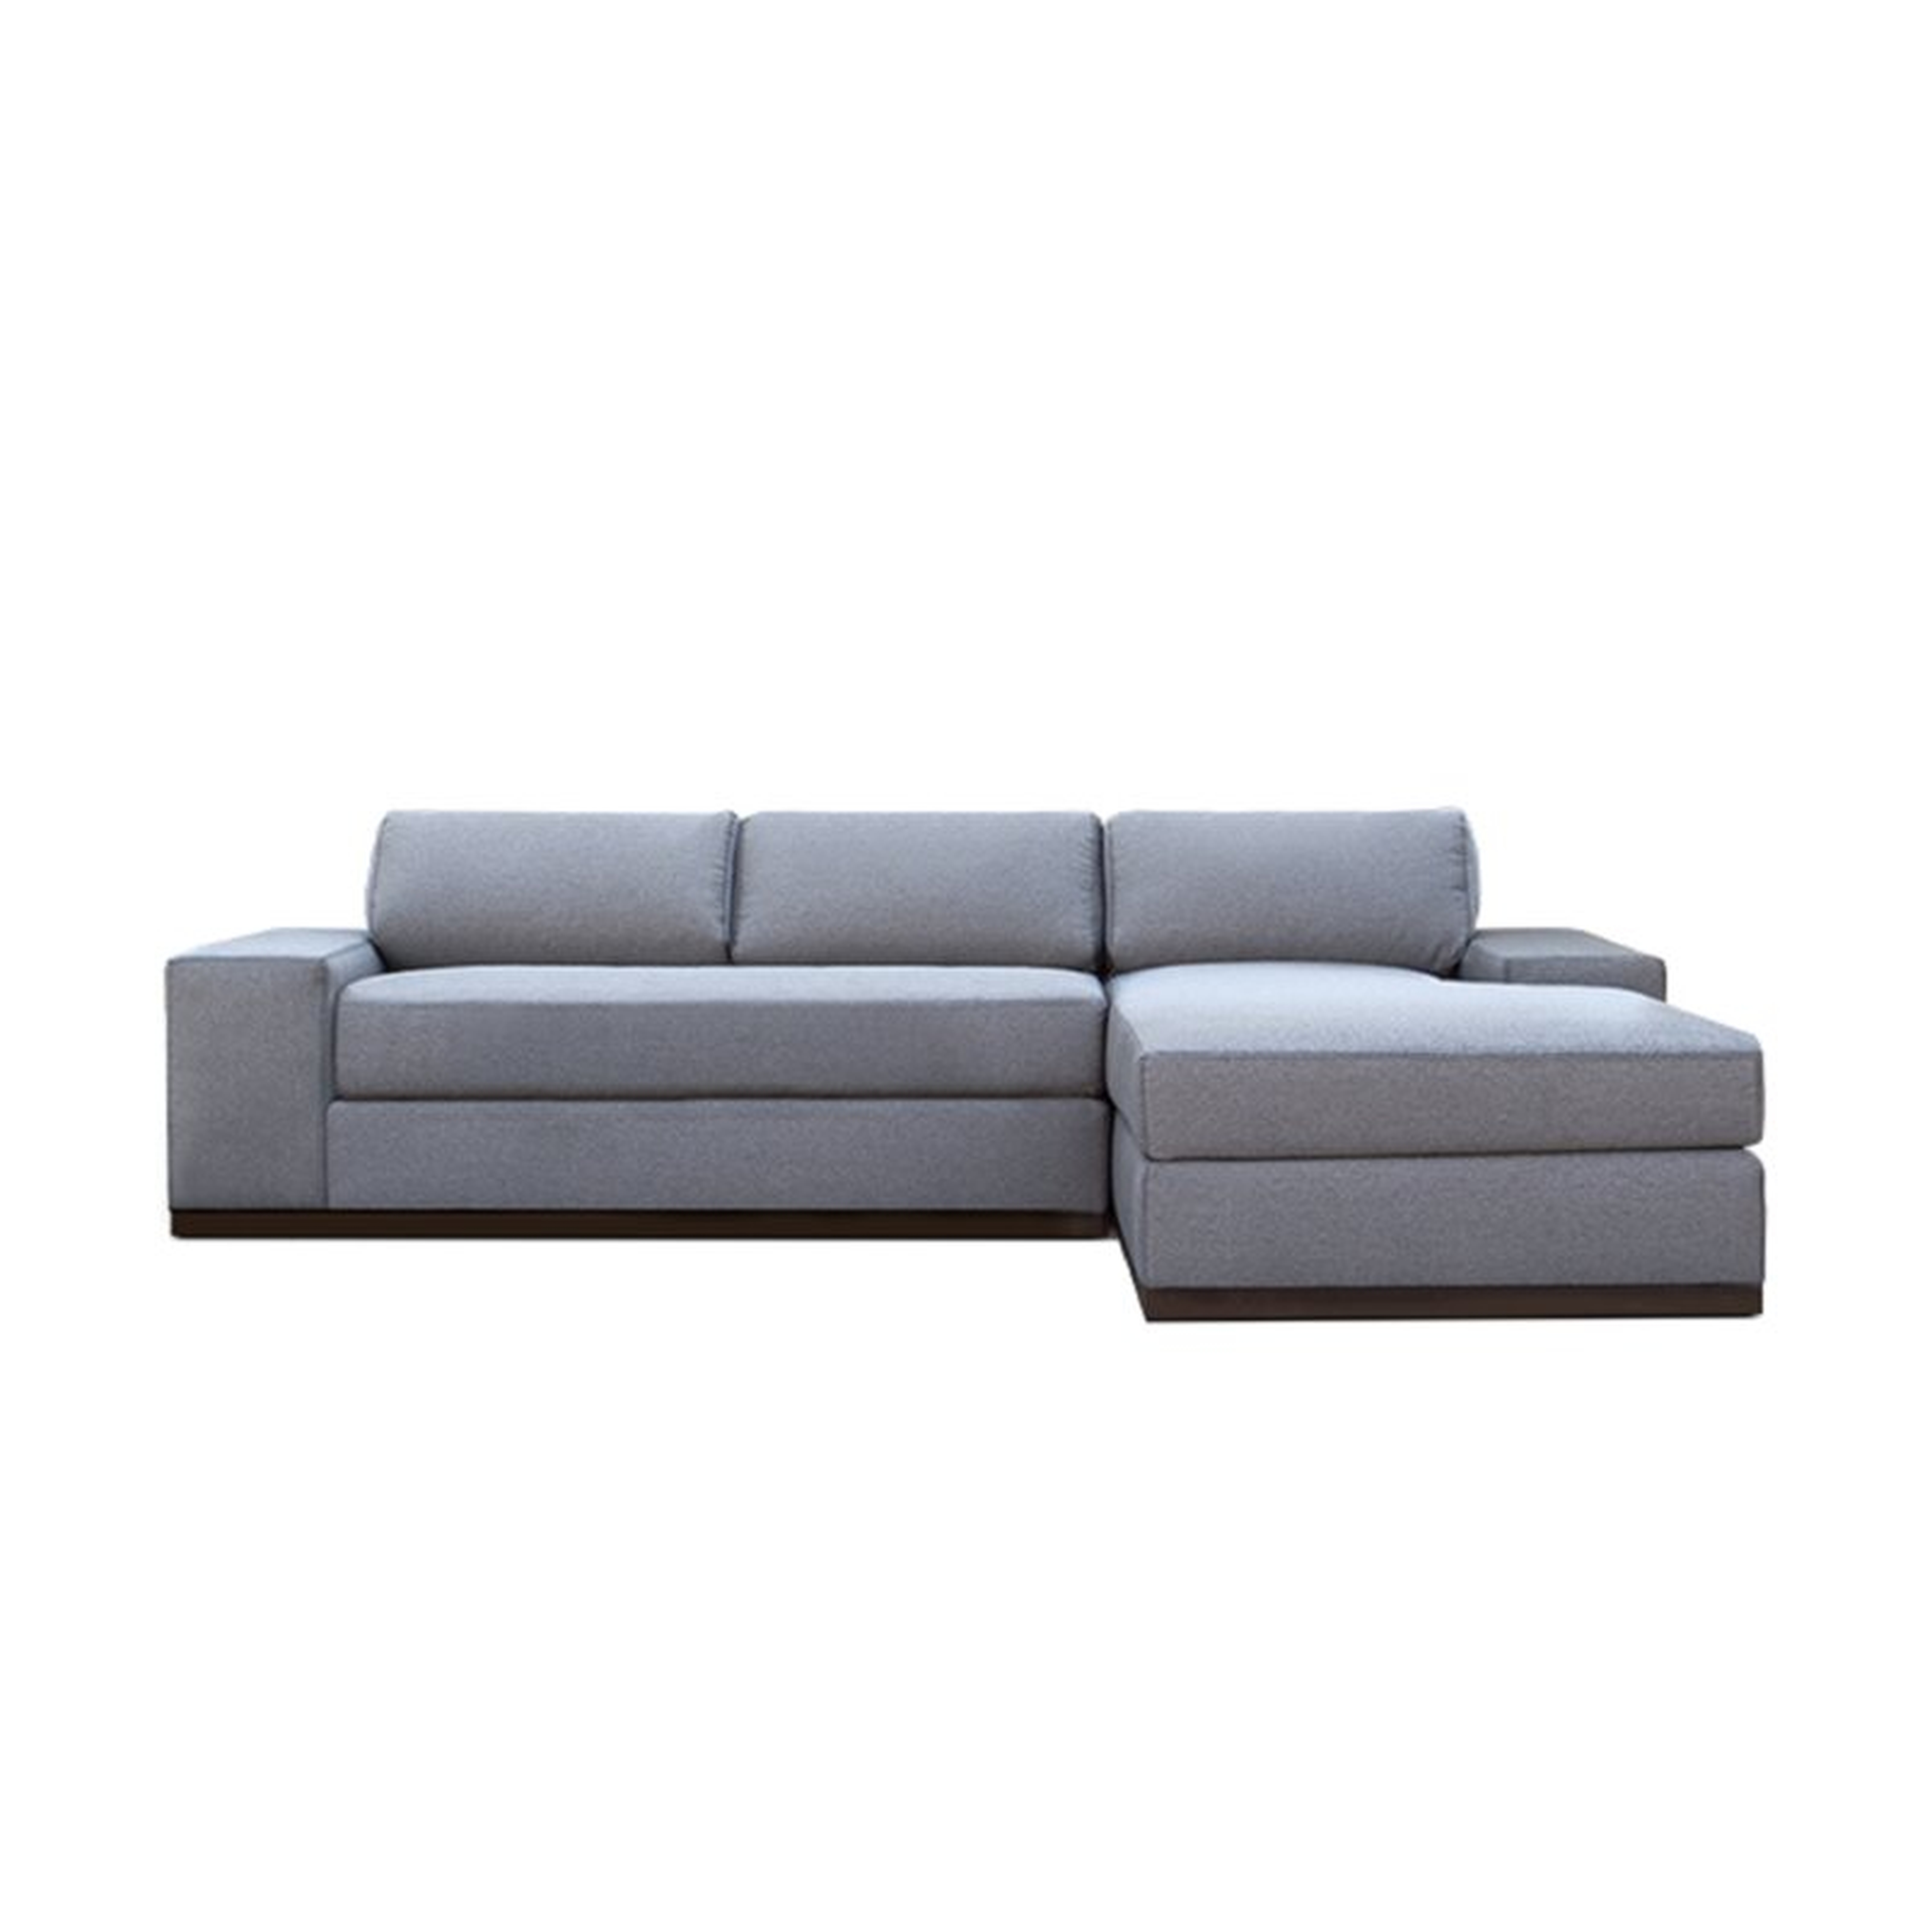 My Chic Nest Evan 111.5"" Wide Right Hand Facing Sofa & Chaise - Perigold